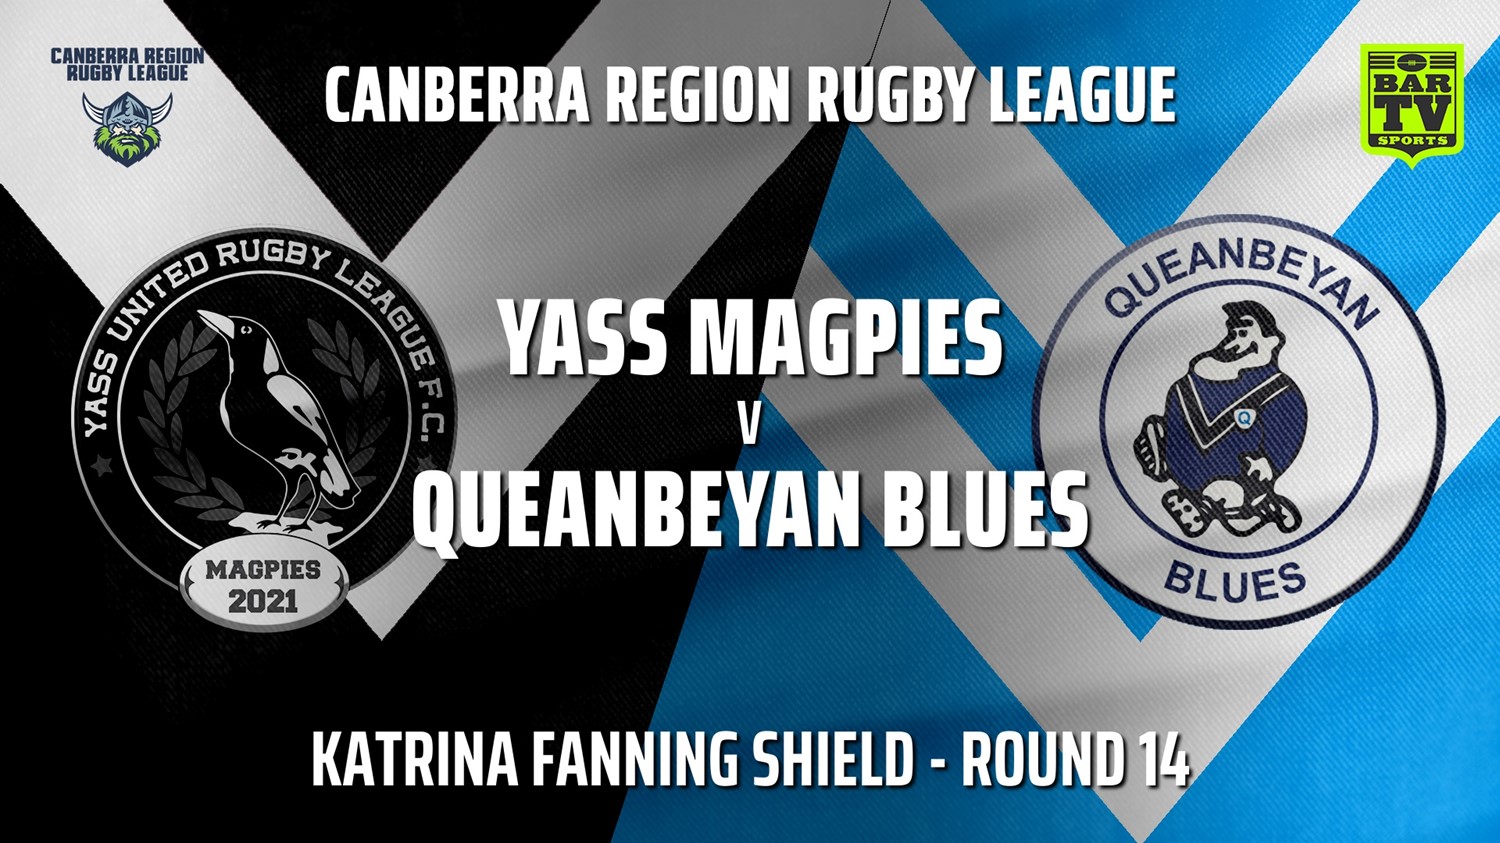 210807-Canberra Round 14 - Katrina Fanning Shield - Yass Magpies v Queanbeyan Blues Slate Image